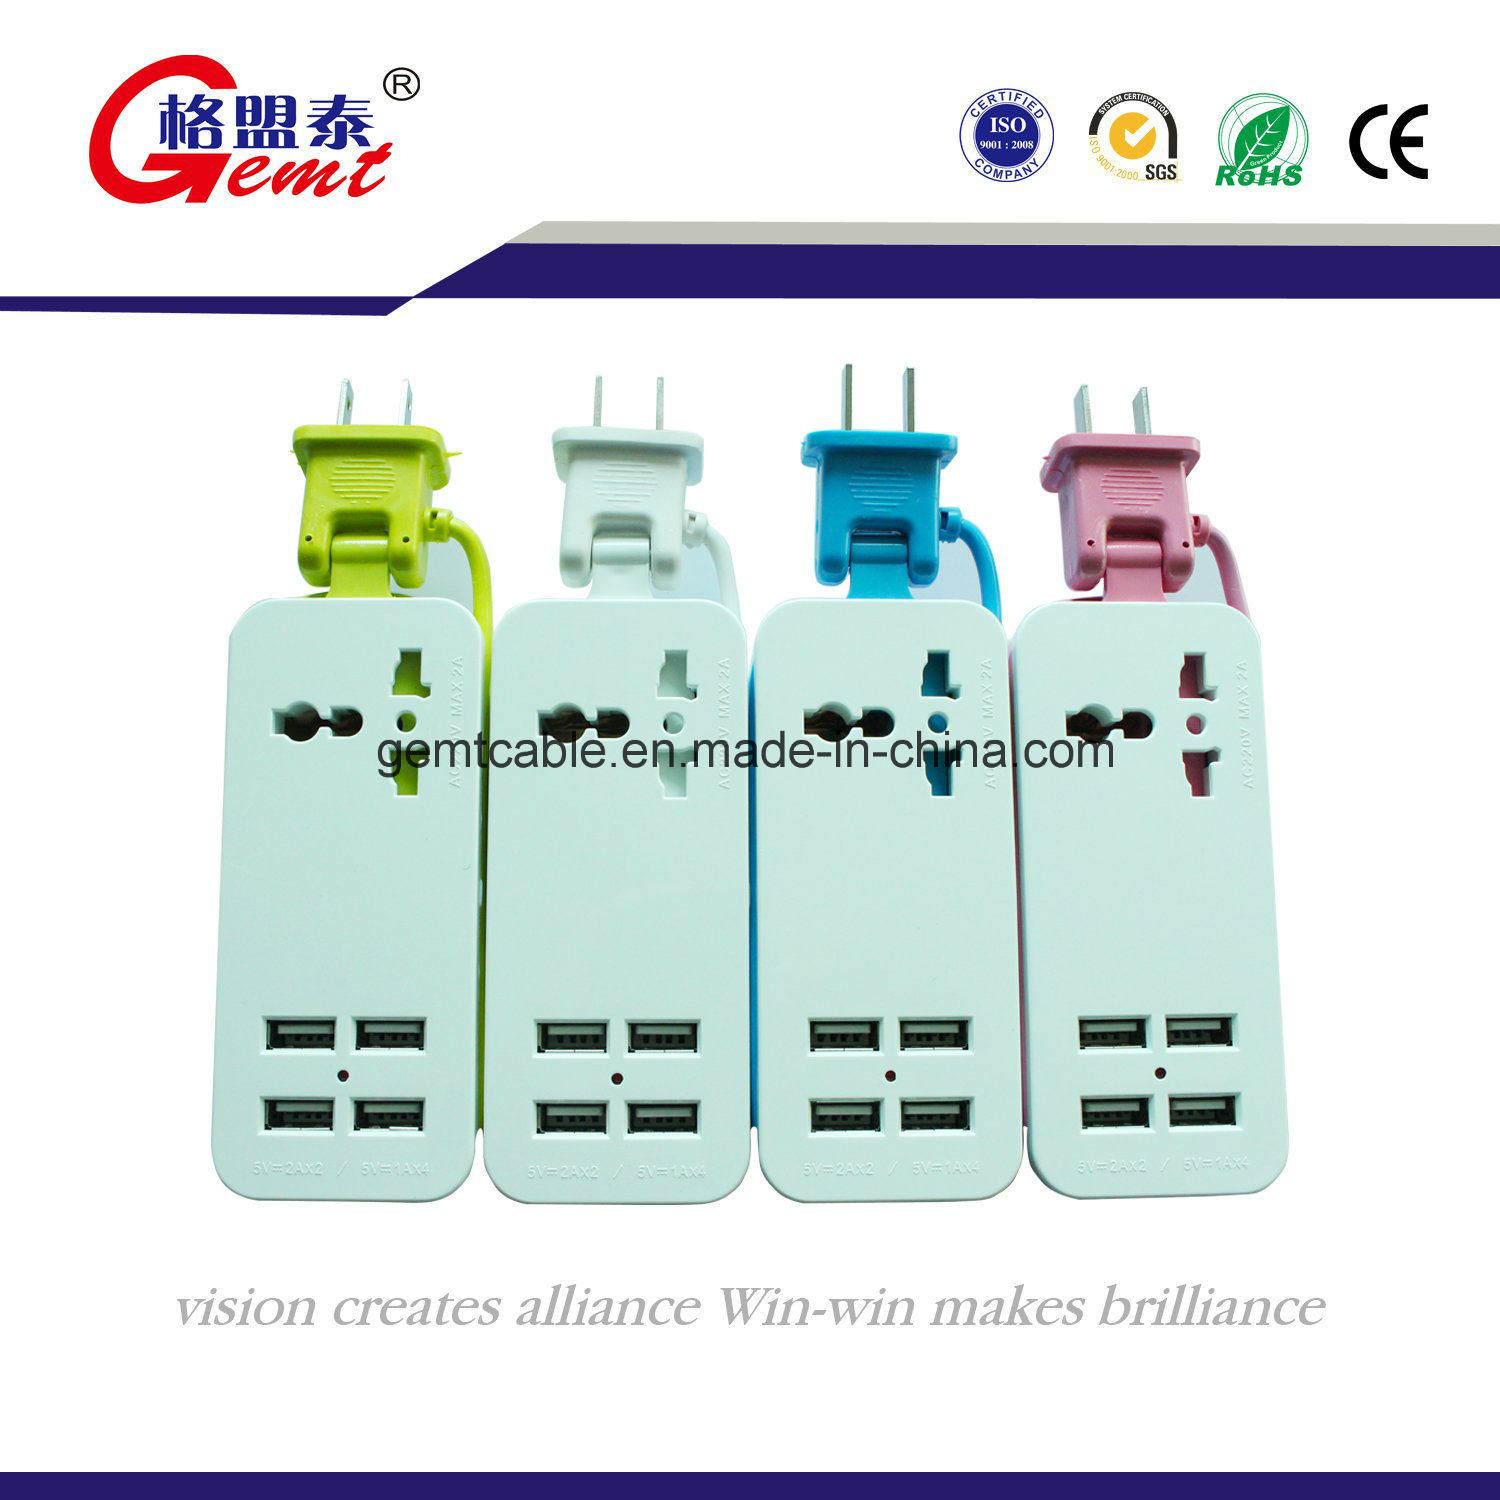 Portable Universal Electrical Travel Outlet Surge Protector Adapter 4USB with Child Protection